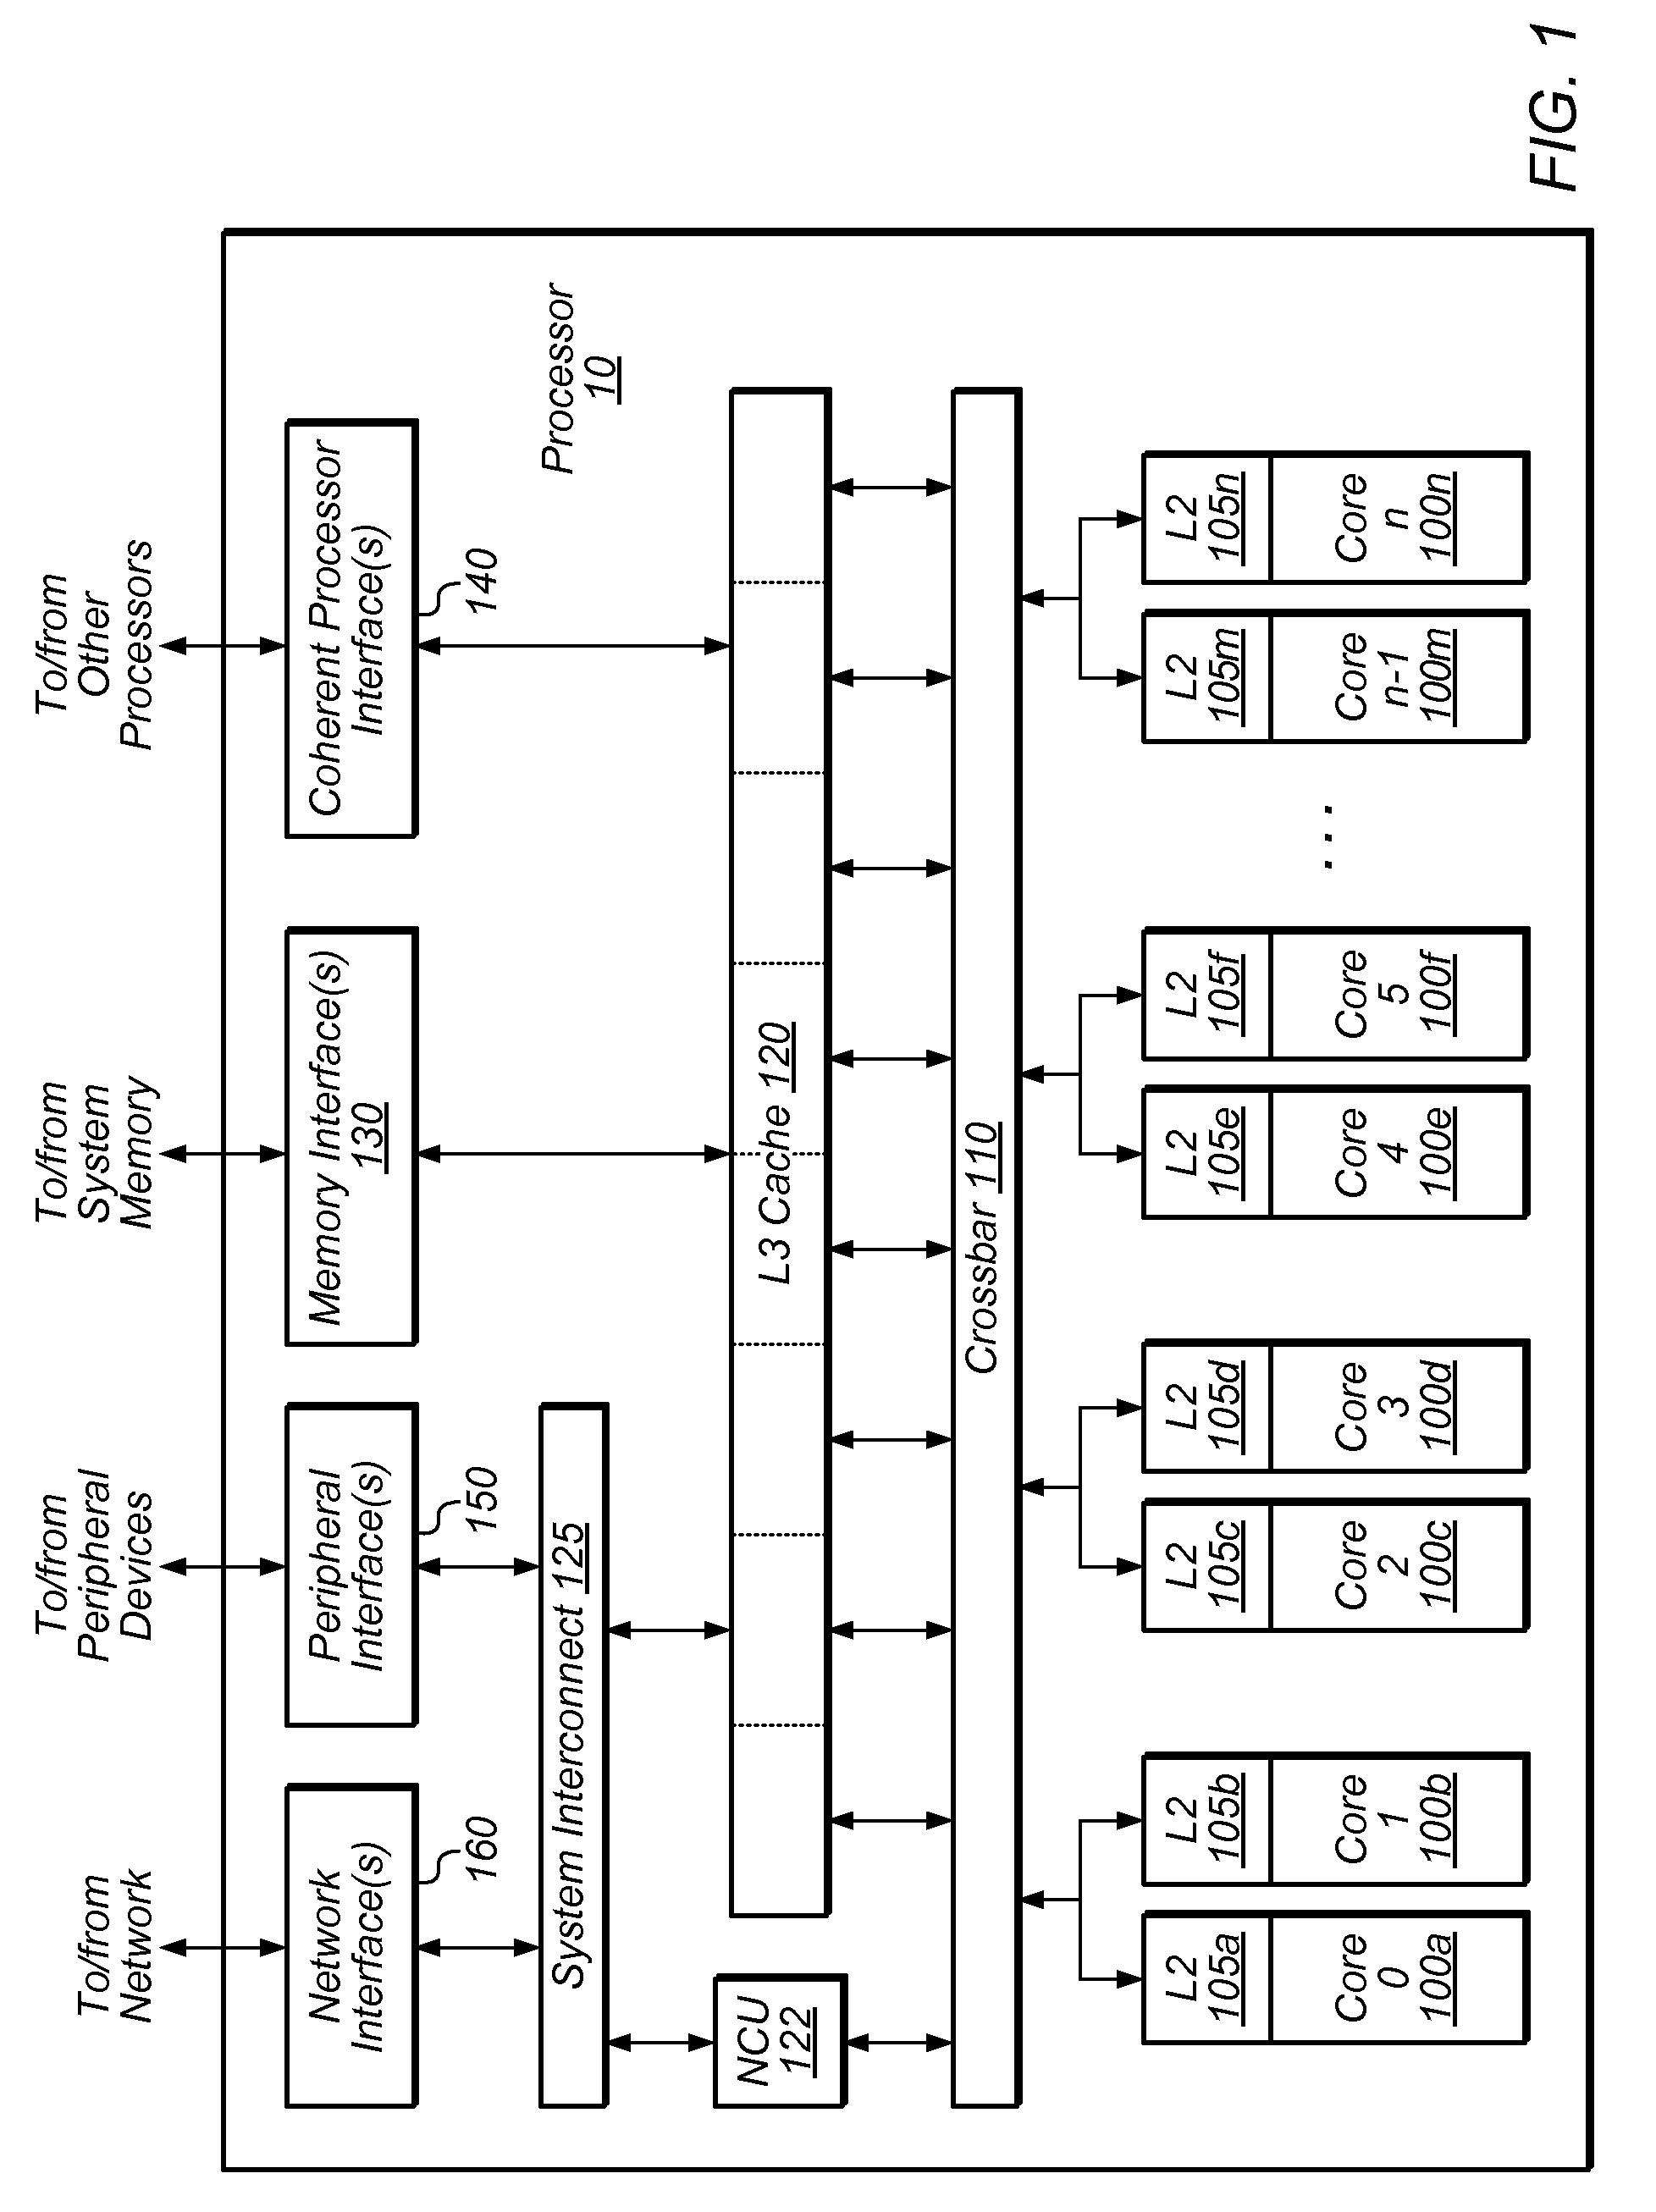 Apparatus and method for handling dependency conditions